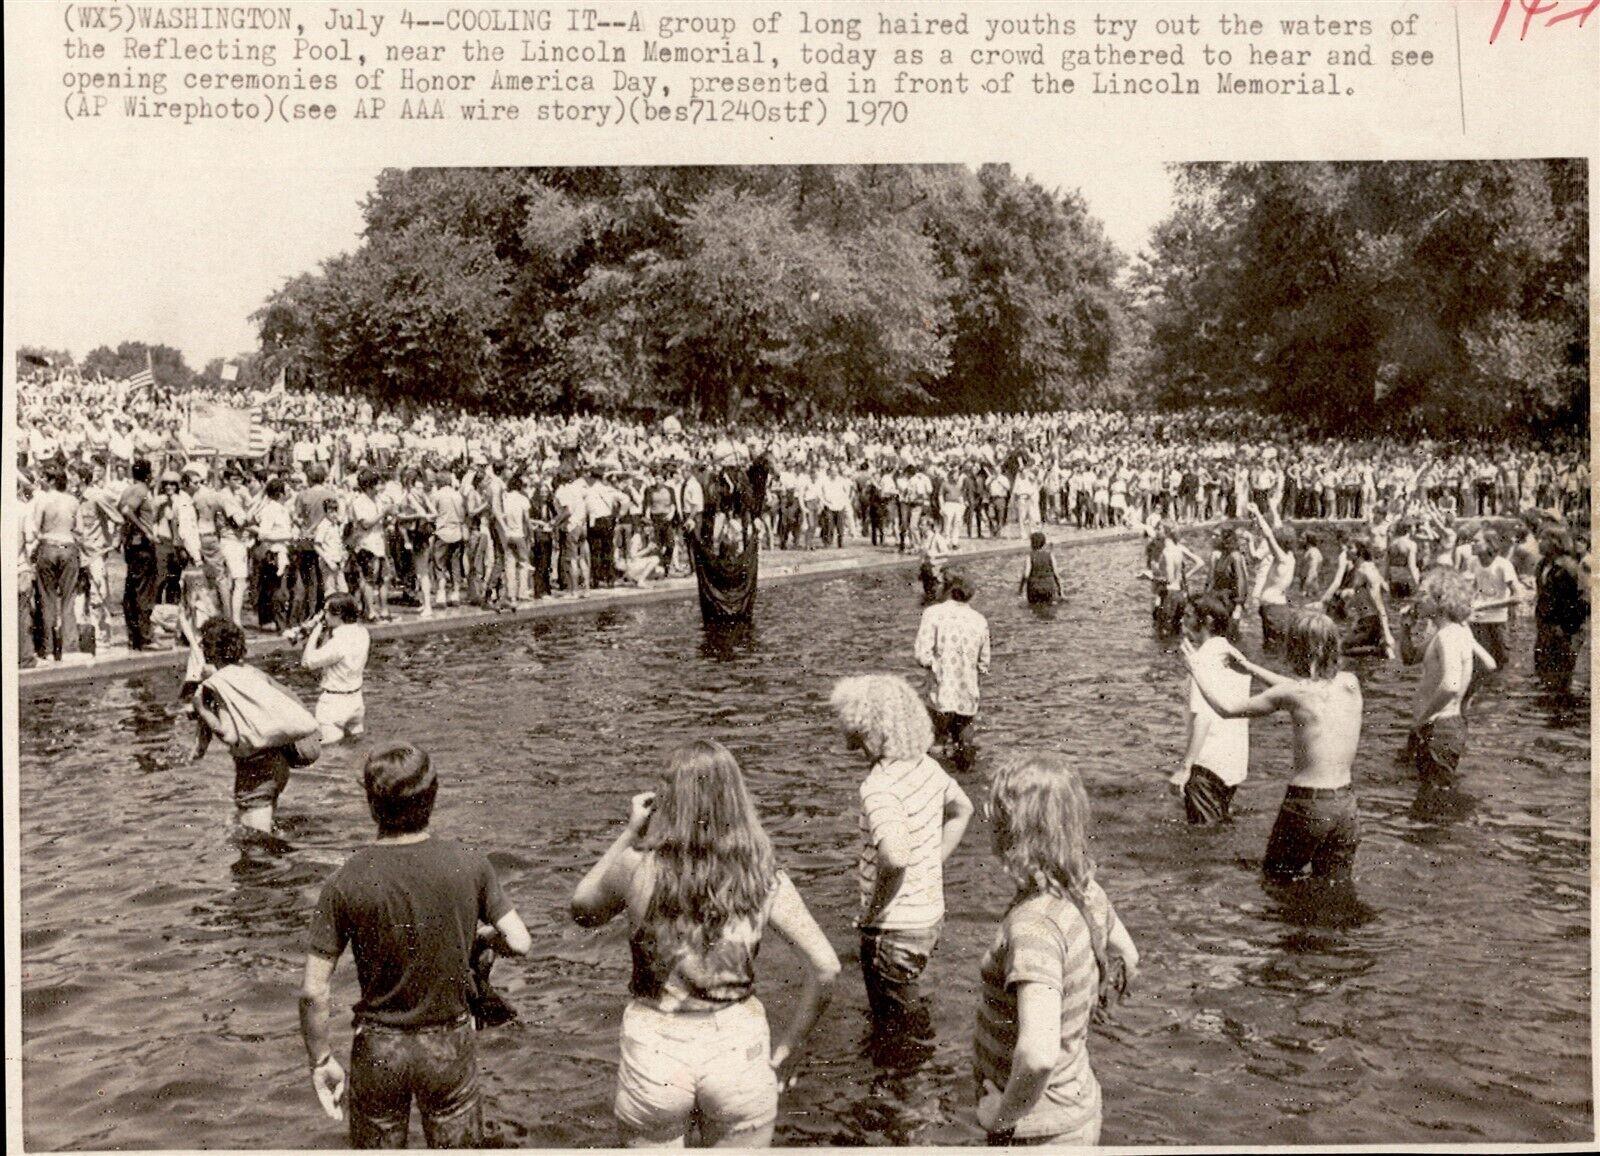 LG980 1970 AP Wire Photo COOLING IT LONG-HAIR HIPPY YOUTHS LINCOLN MEMORIAL POOL